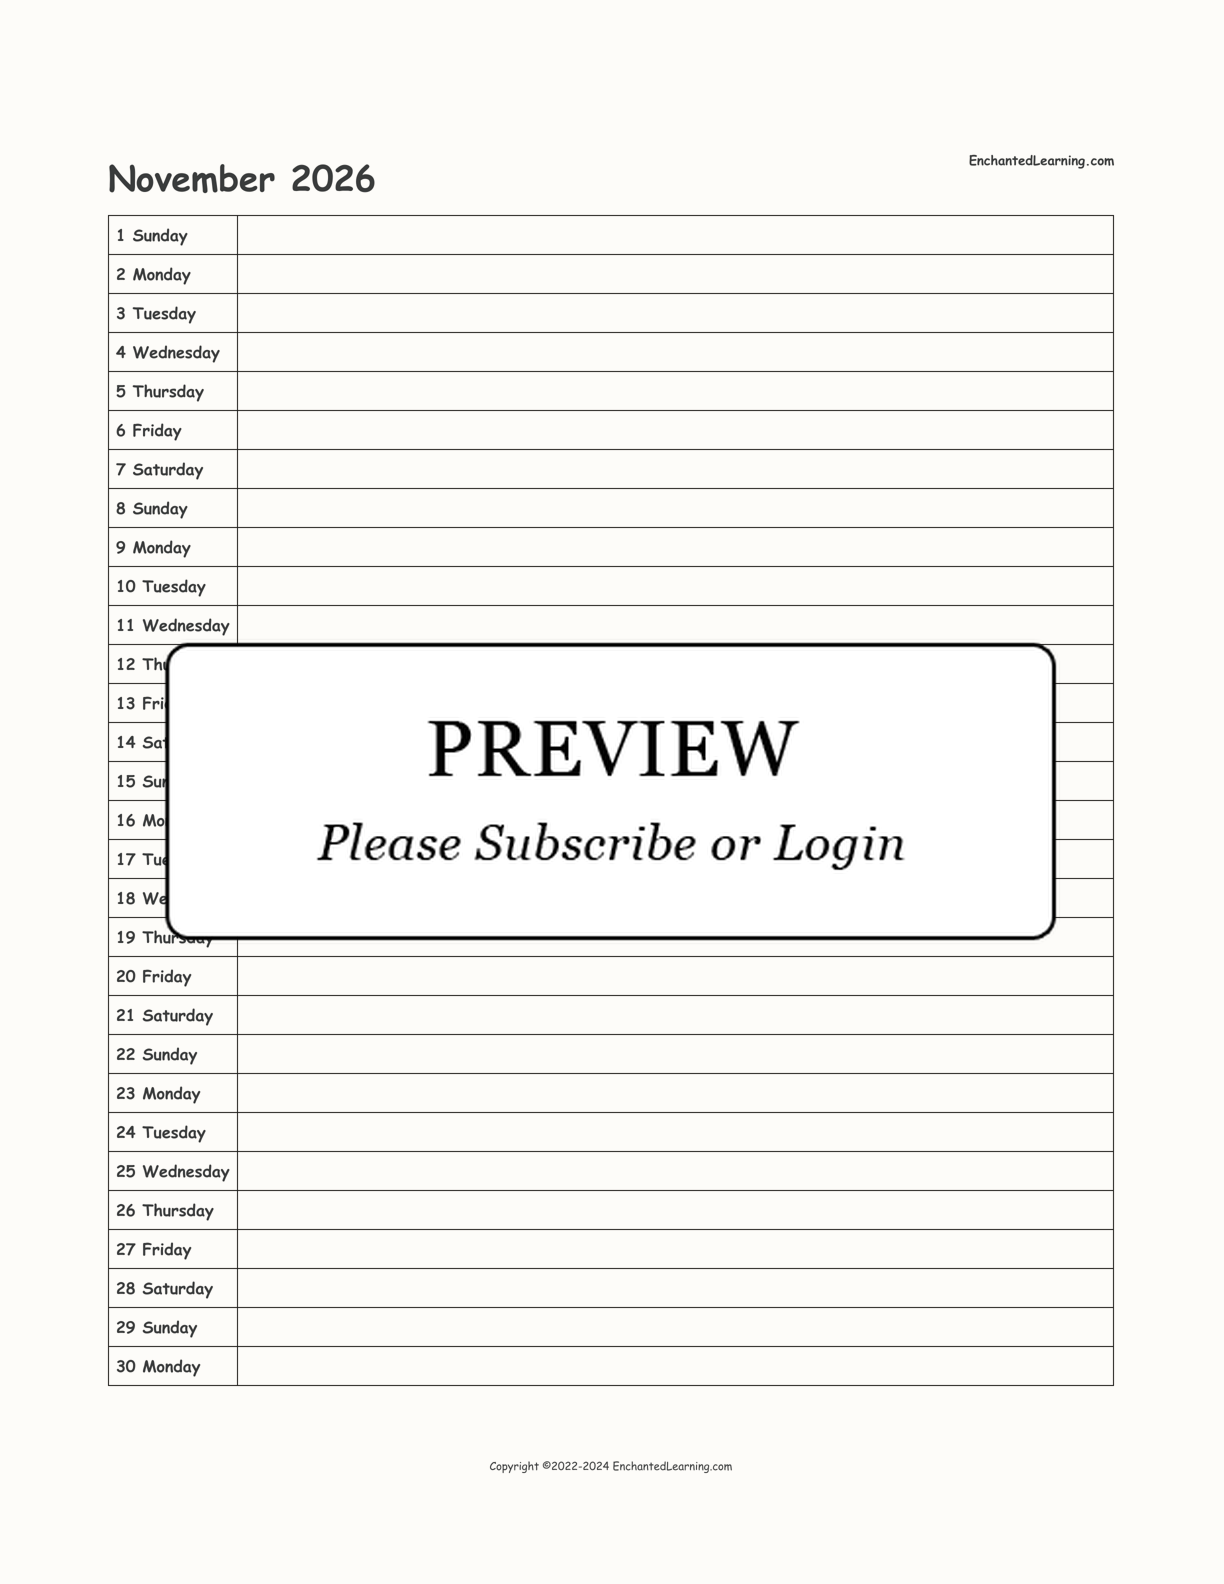 2026 Scheduling Calendar interactive printout page 11